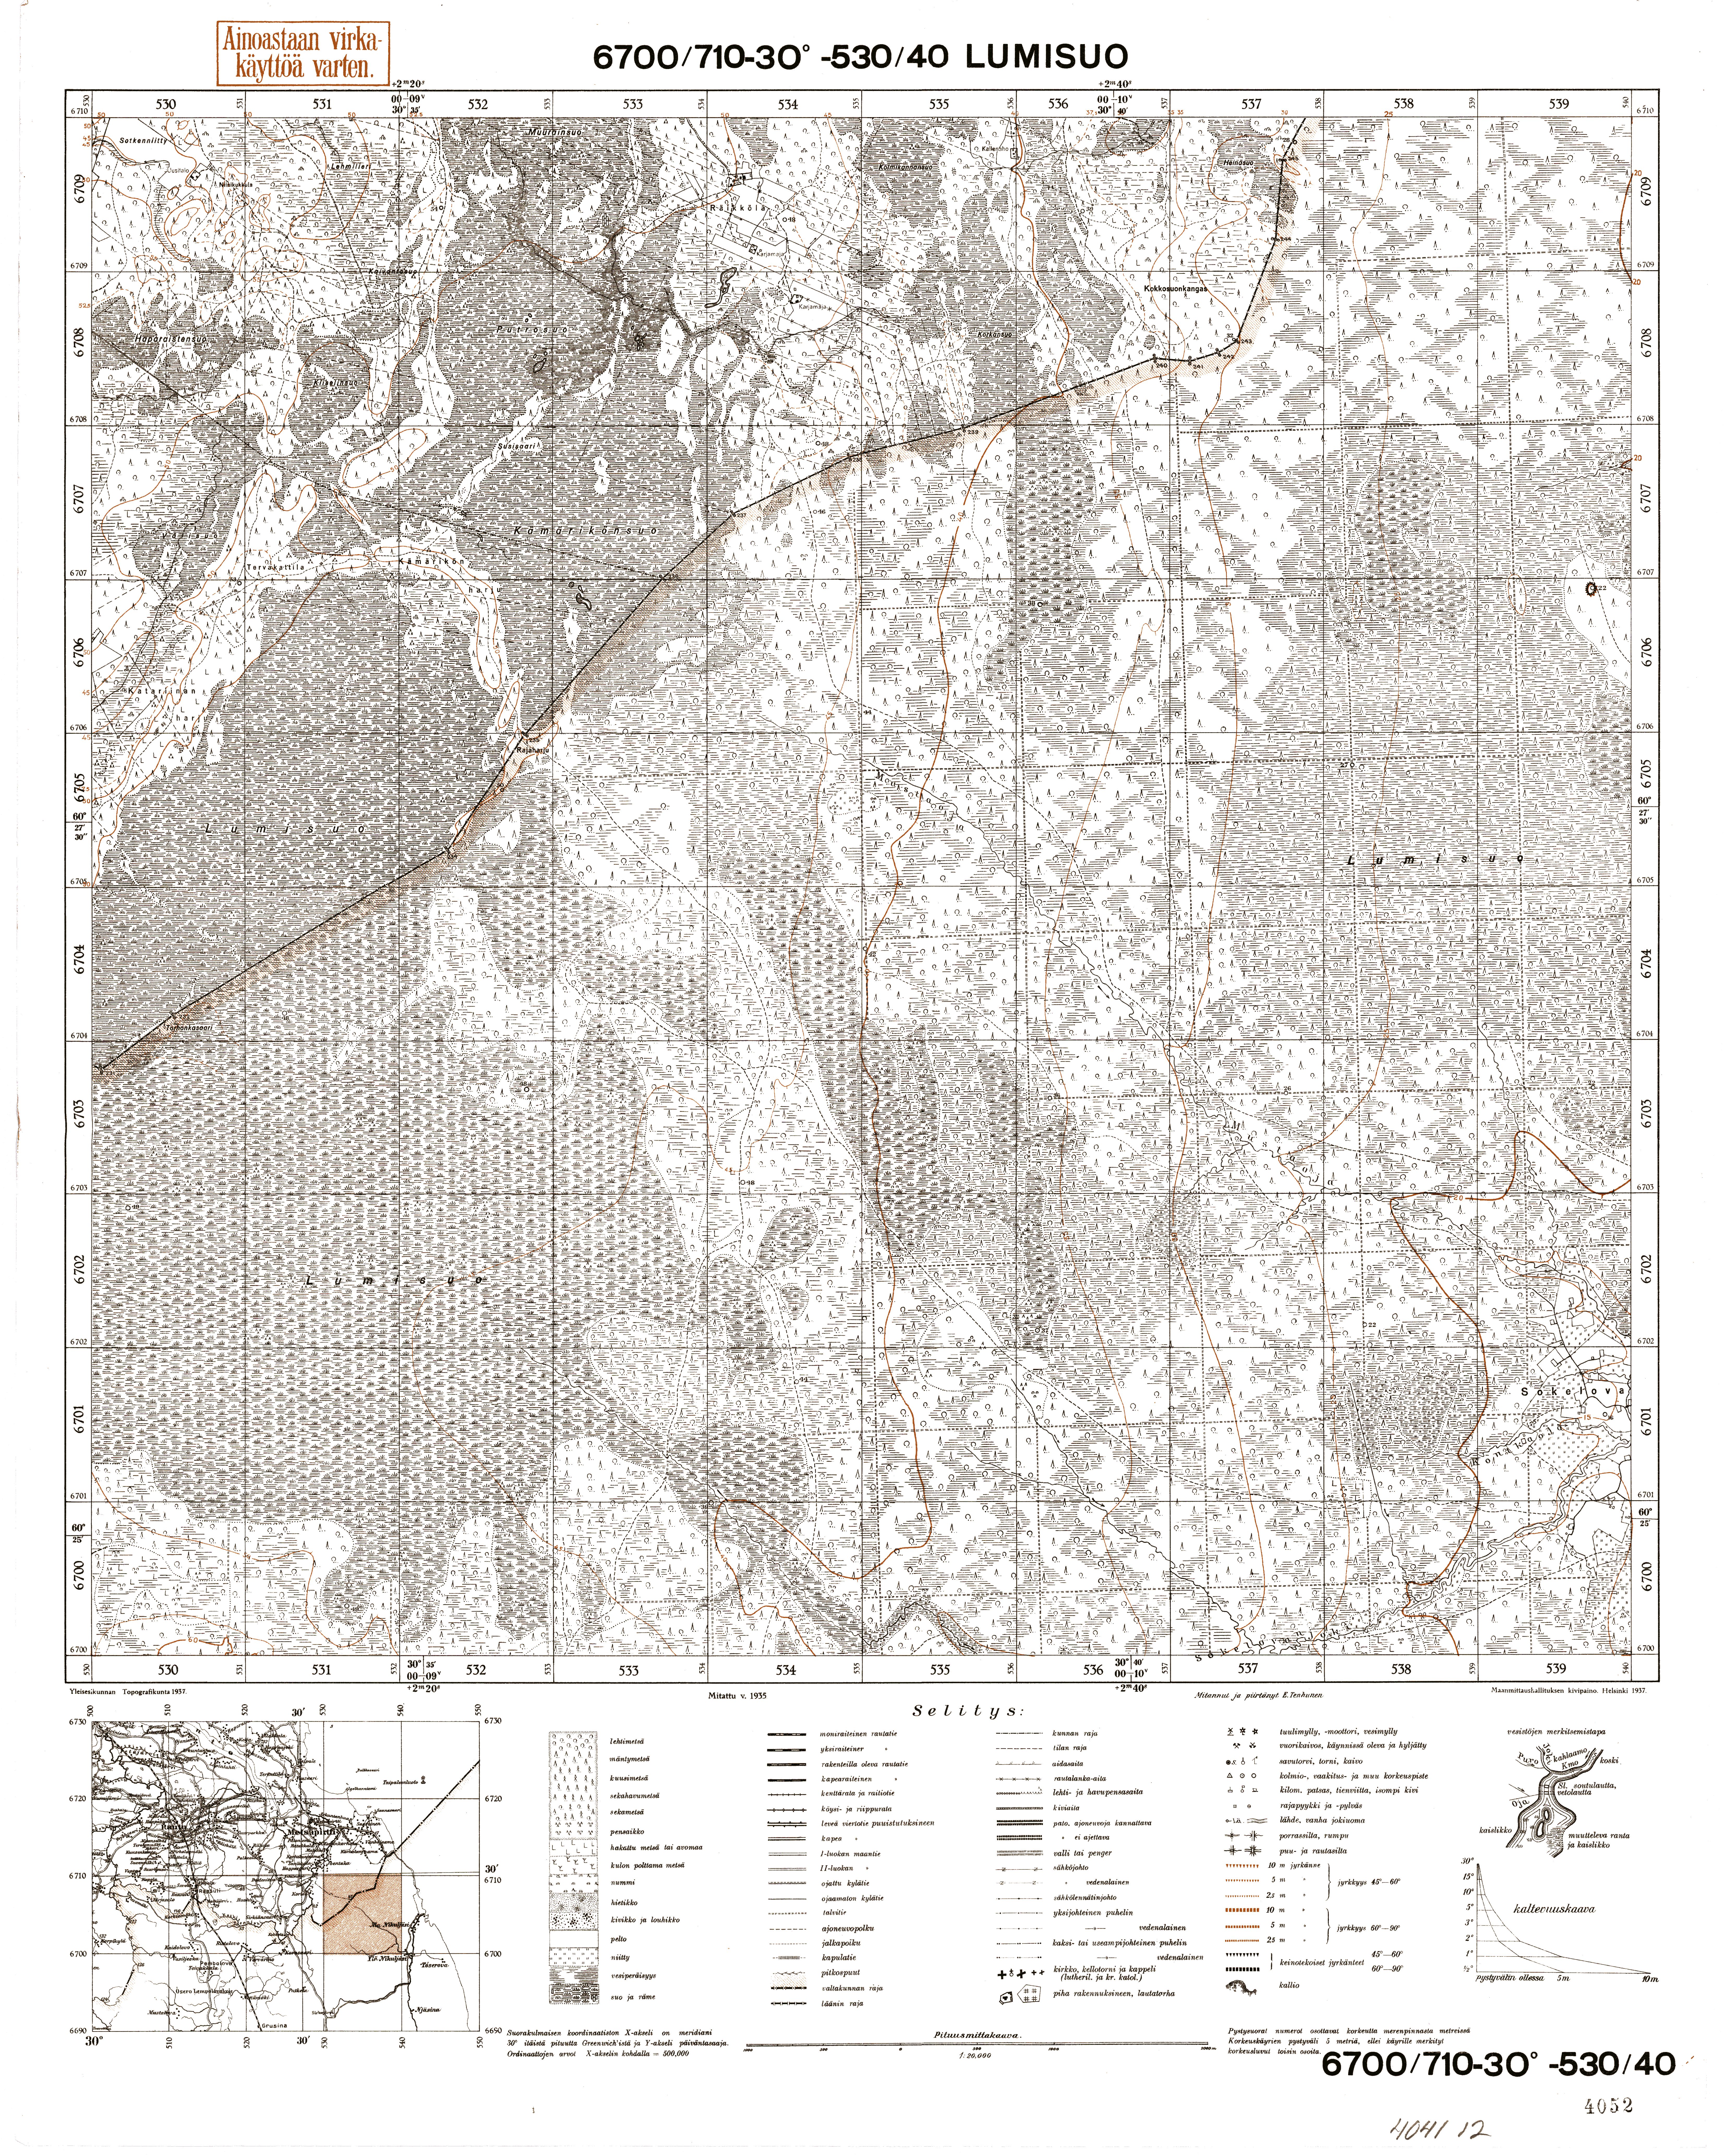 Neodolimoje Marshes. Lumisuo. Topografikartta 404112. Topographic map from 1942. Use the zooming tool to explore in higher level of detail. Obtain as a quality print or high resolution image